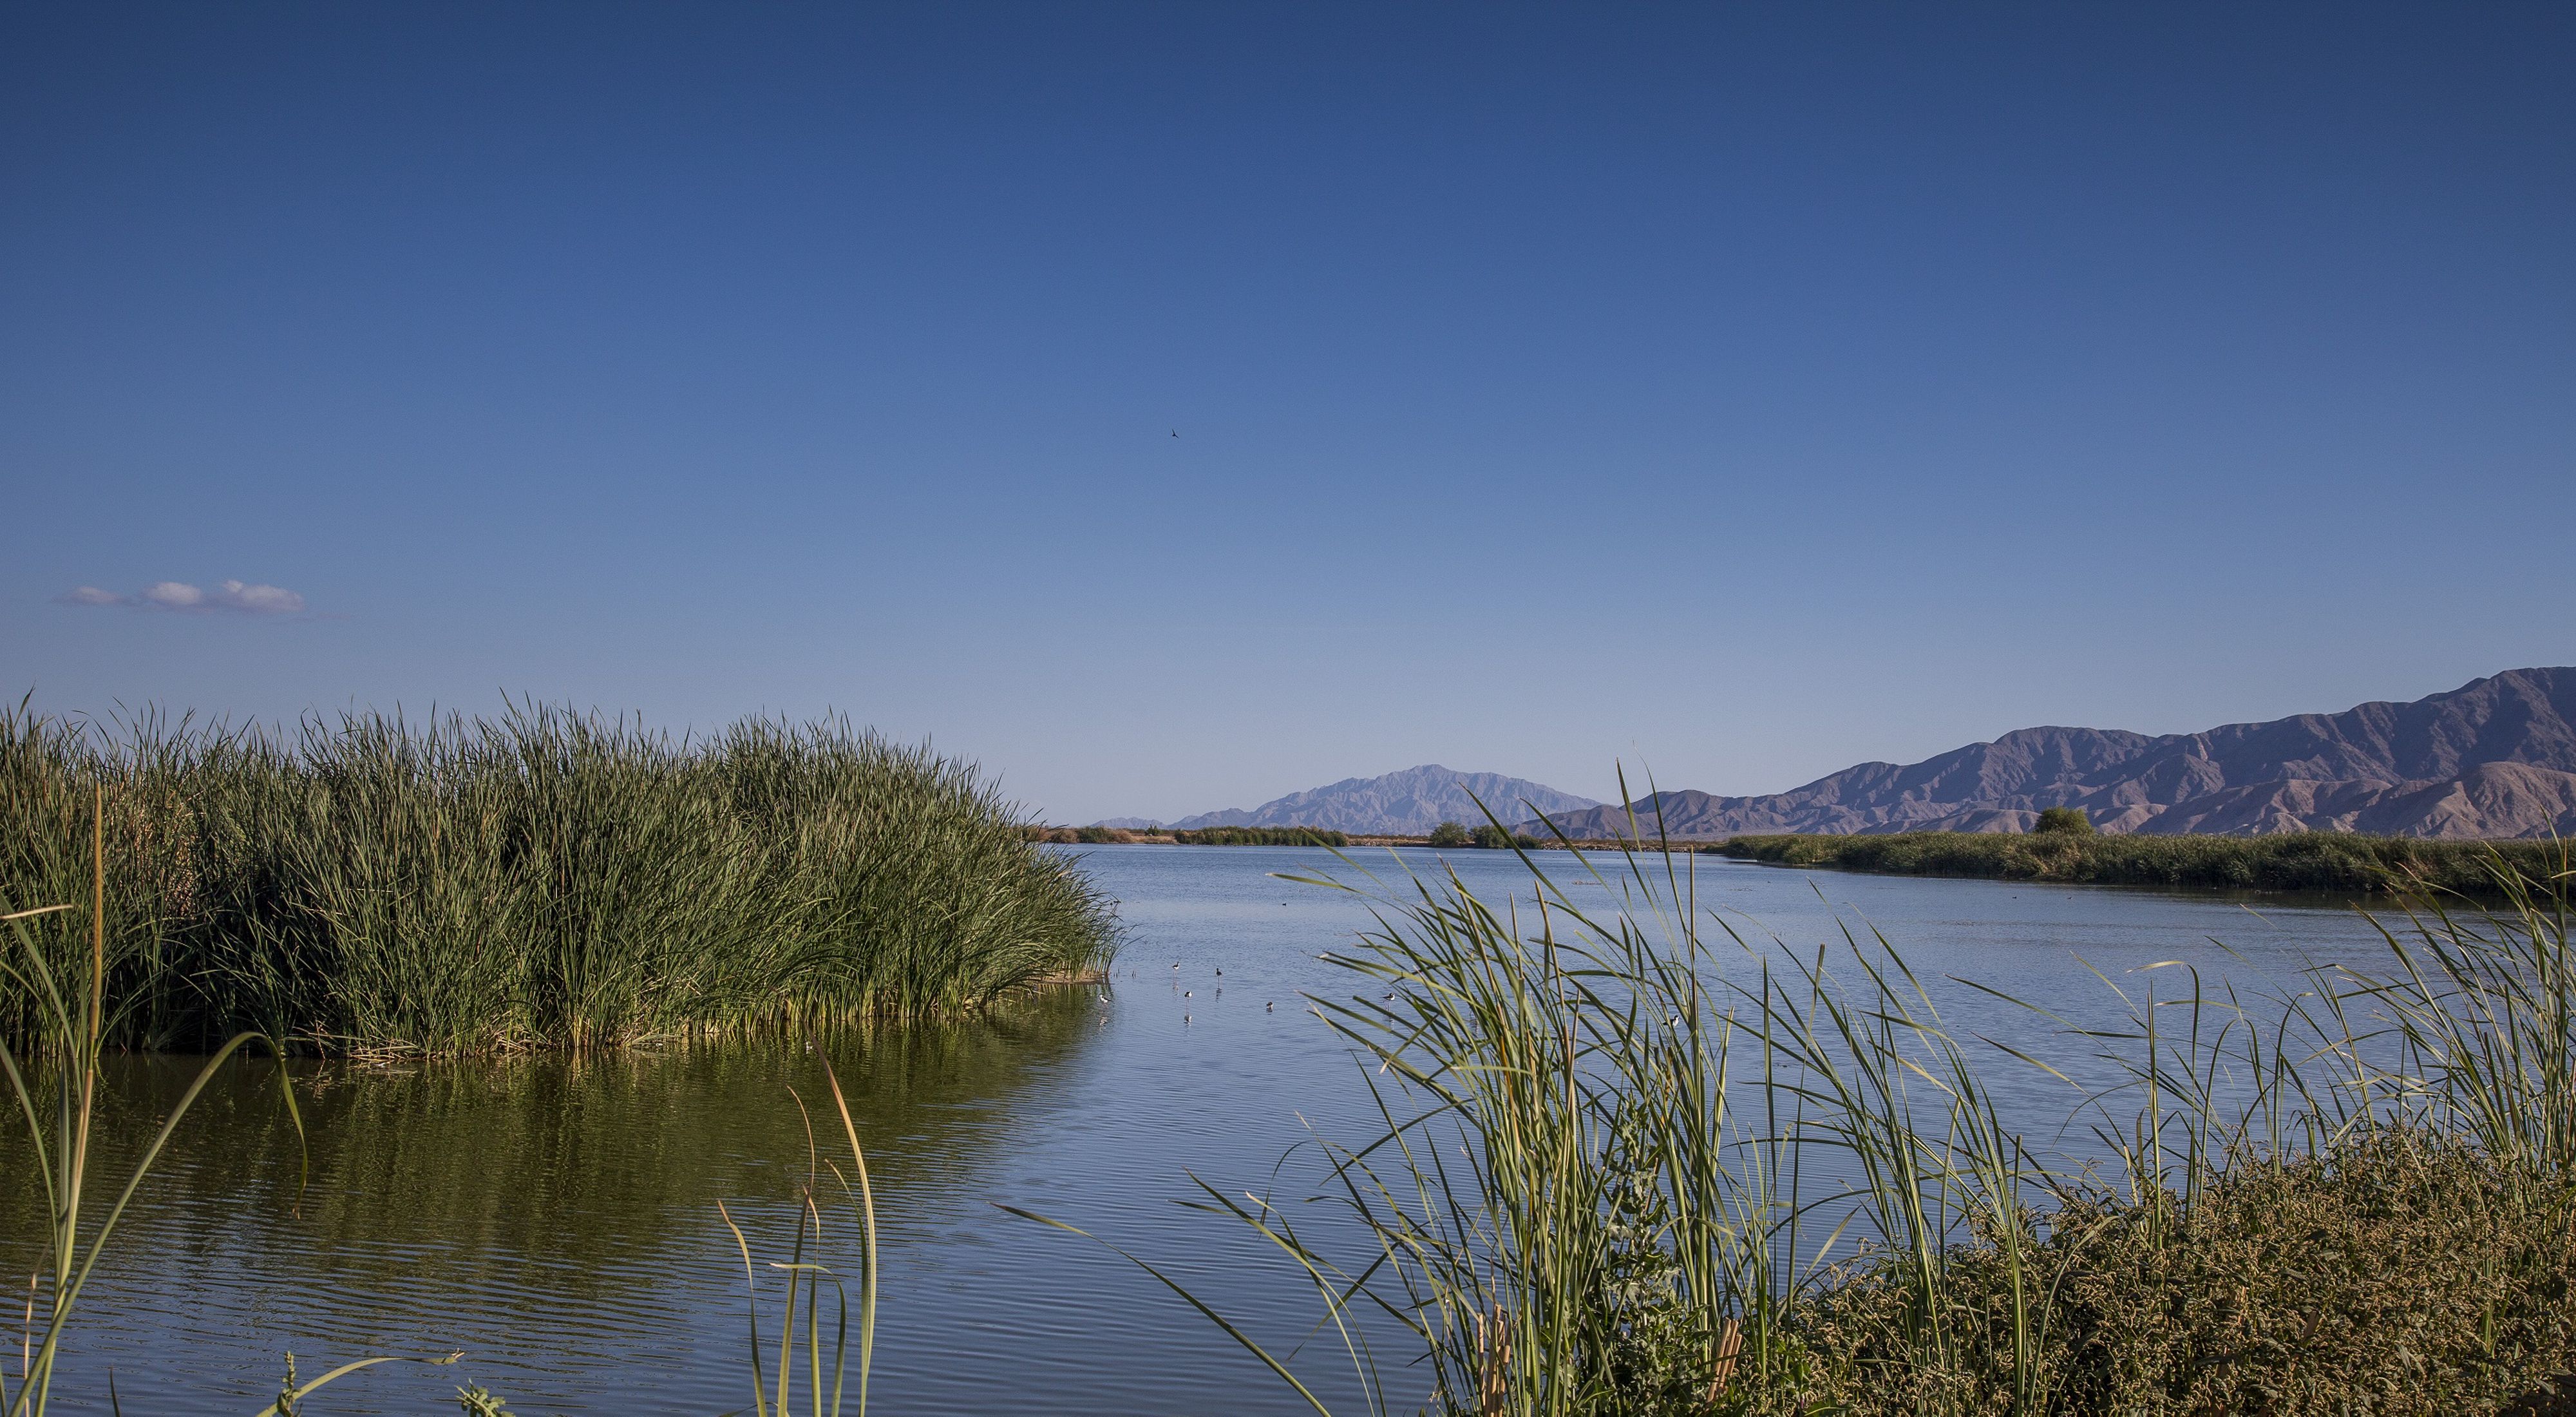 (ALL RIGHTS) May 2013. Las Arenitas is a 250-acre wetland in Mexico’s Sonoran Desert. It is sustained by treated wastewater from a treatment plant that services the city of Mexicali. Working with the treatment plant, Pronatura Noroeste and the Sonoran Institute constructed these wetlands to remove pollutants from the wastewater, giving it an additional cleansing before it is released into the Rio Hardy. This project has also help restore vital Colorado River Delta habitat. Photo credit: © Erika Nortemann/TNC             